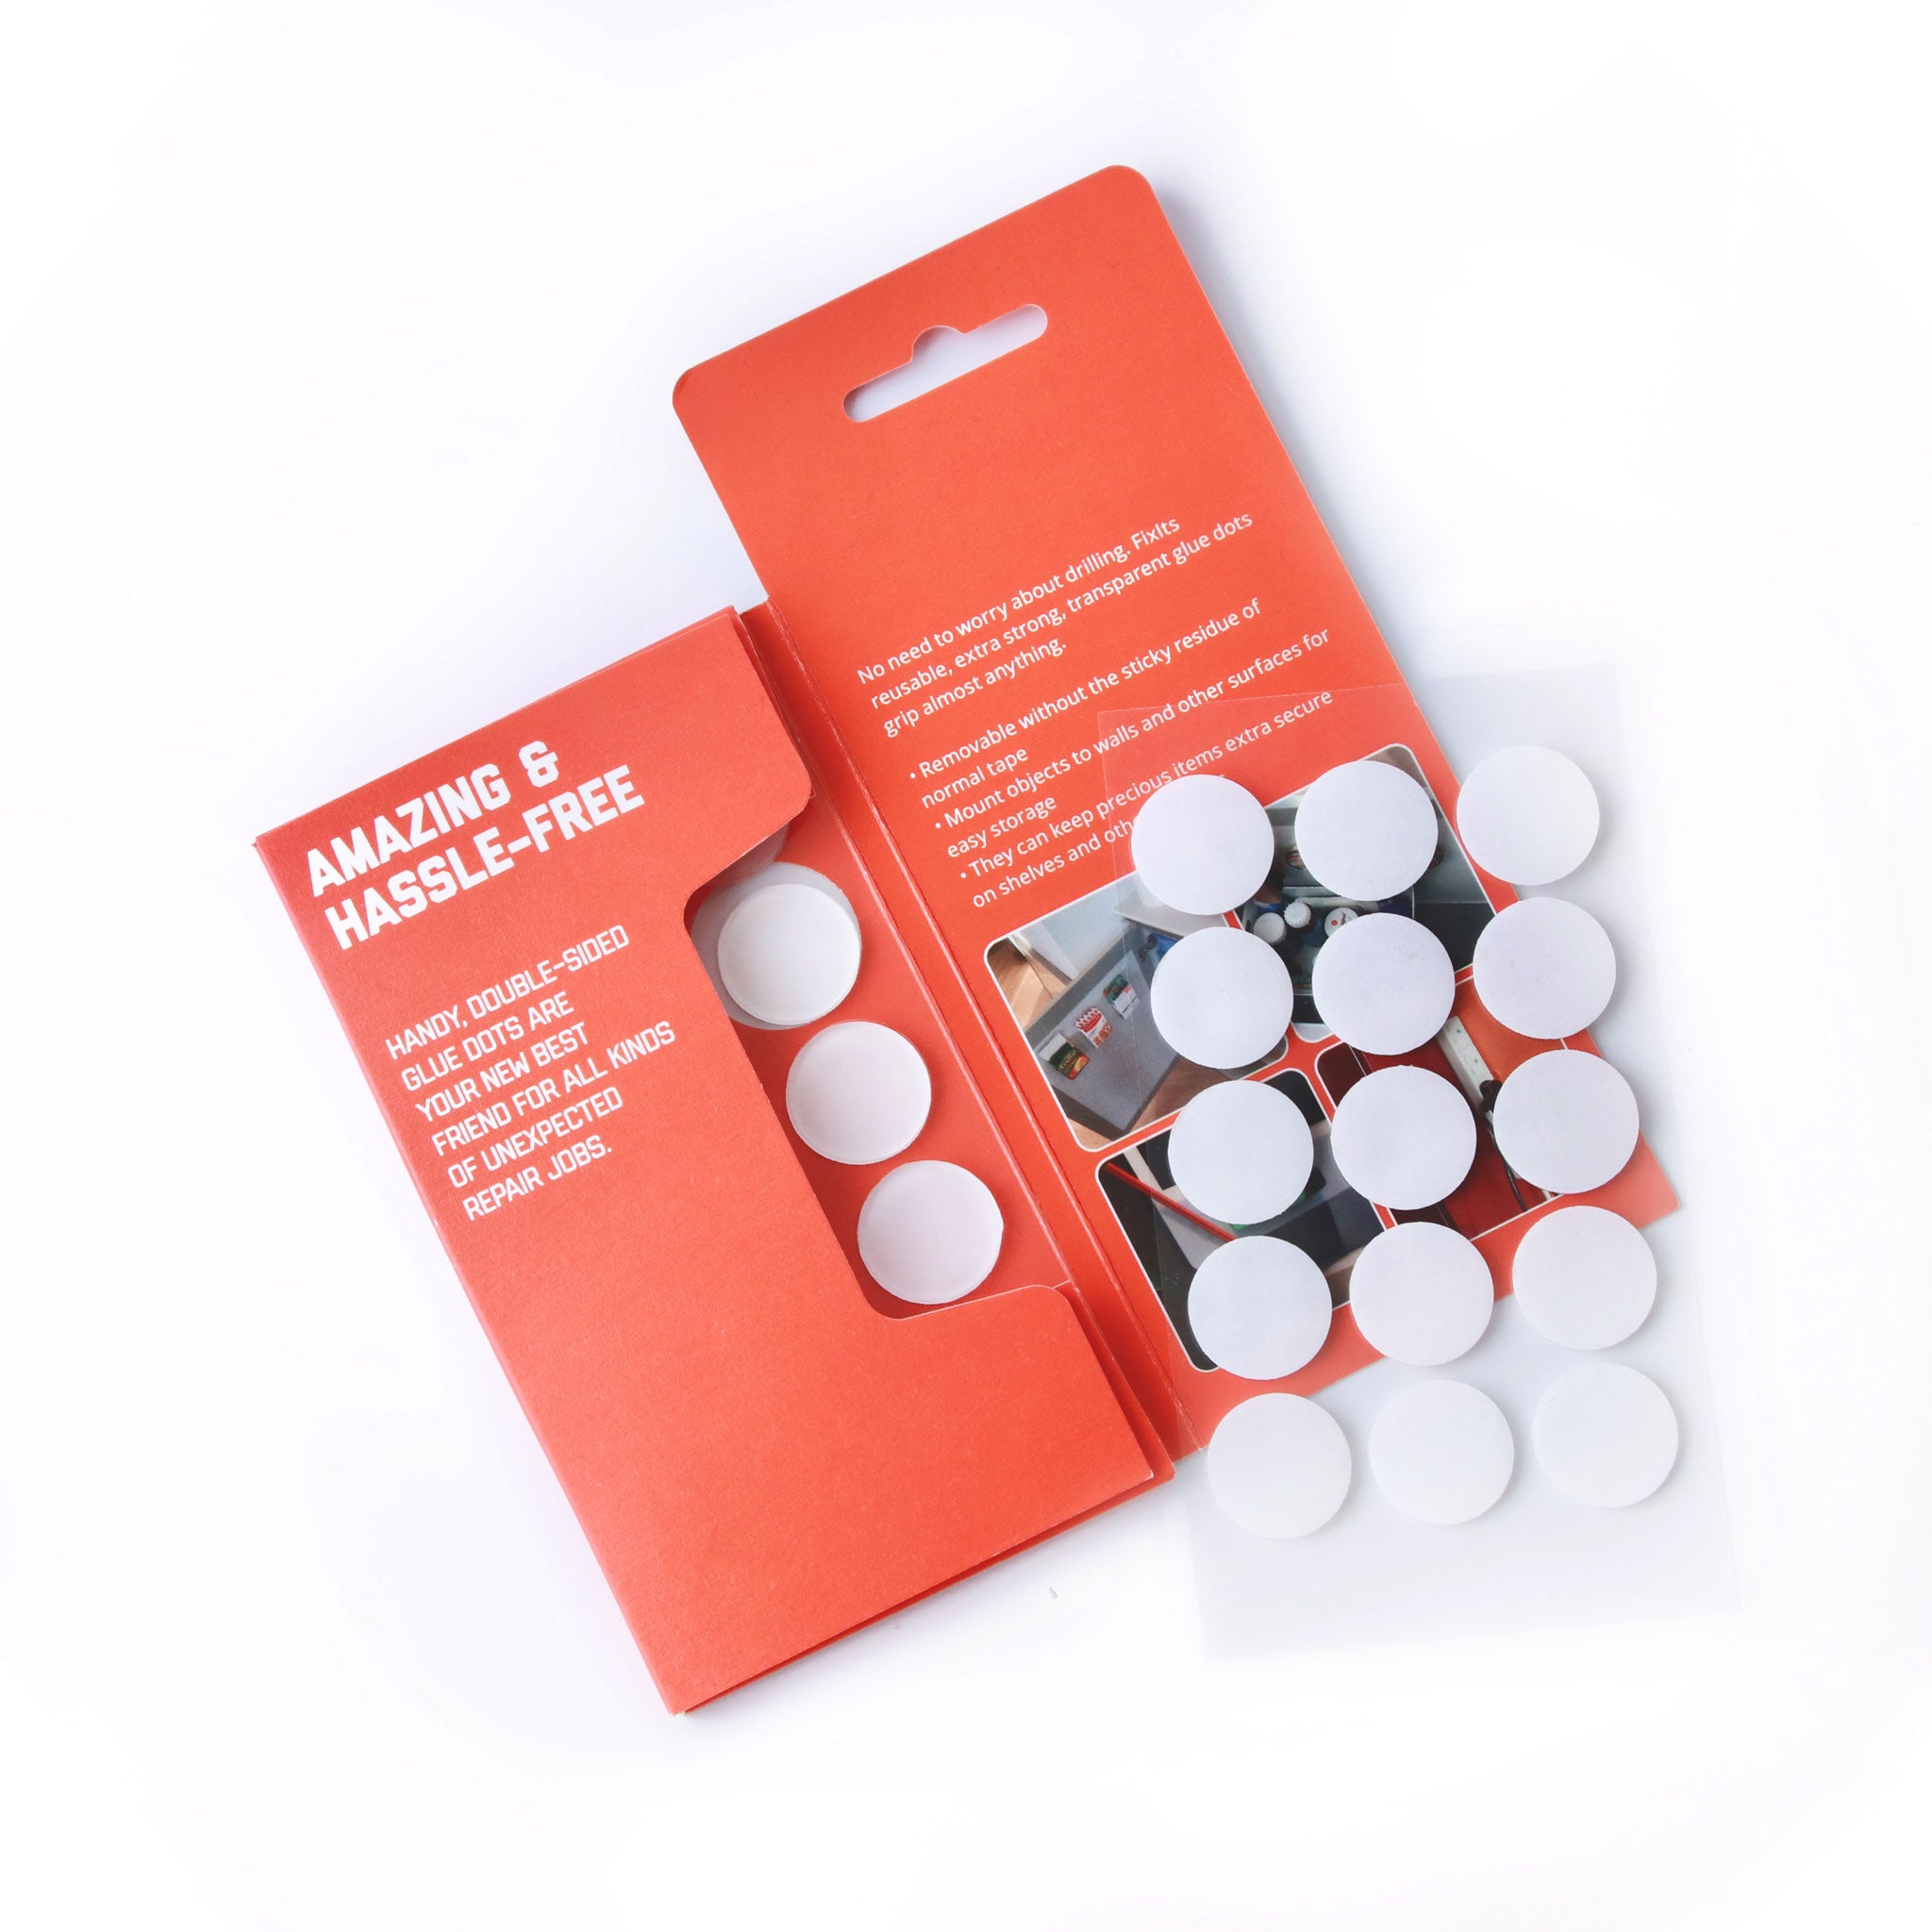 Buy multi-use glue dots removable sticker 1 roll at best price in Pakistan